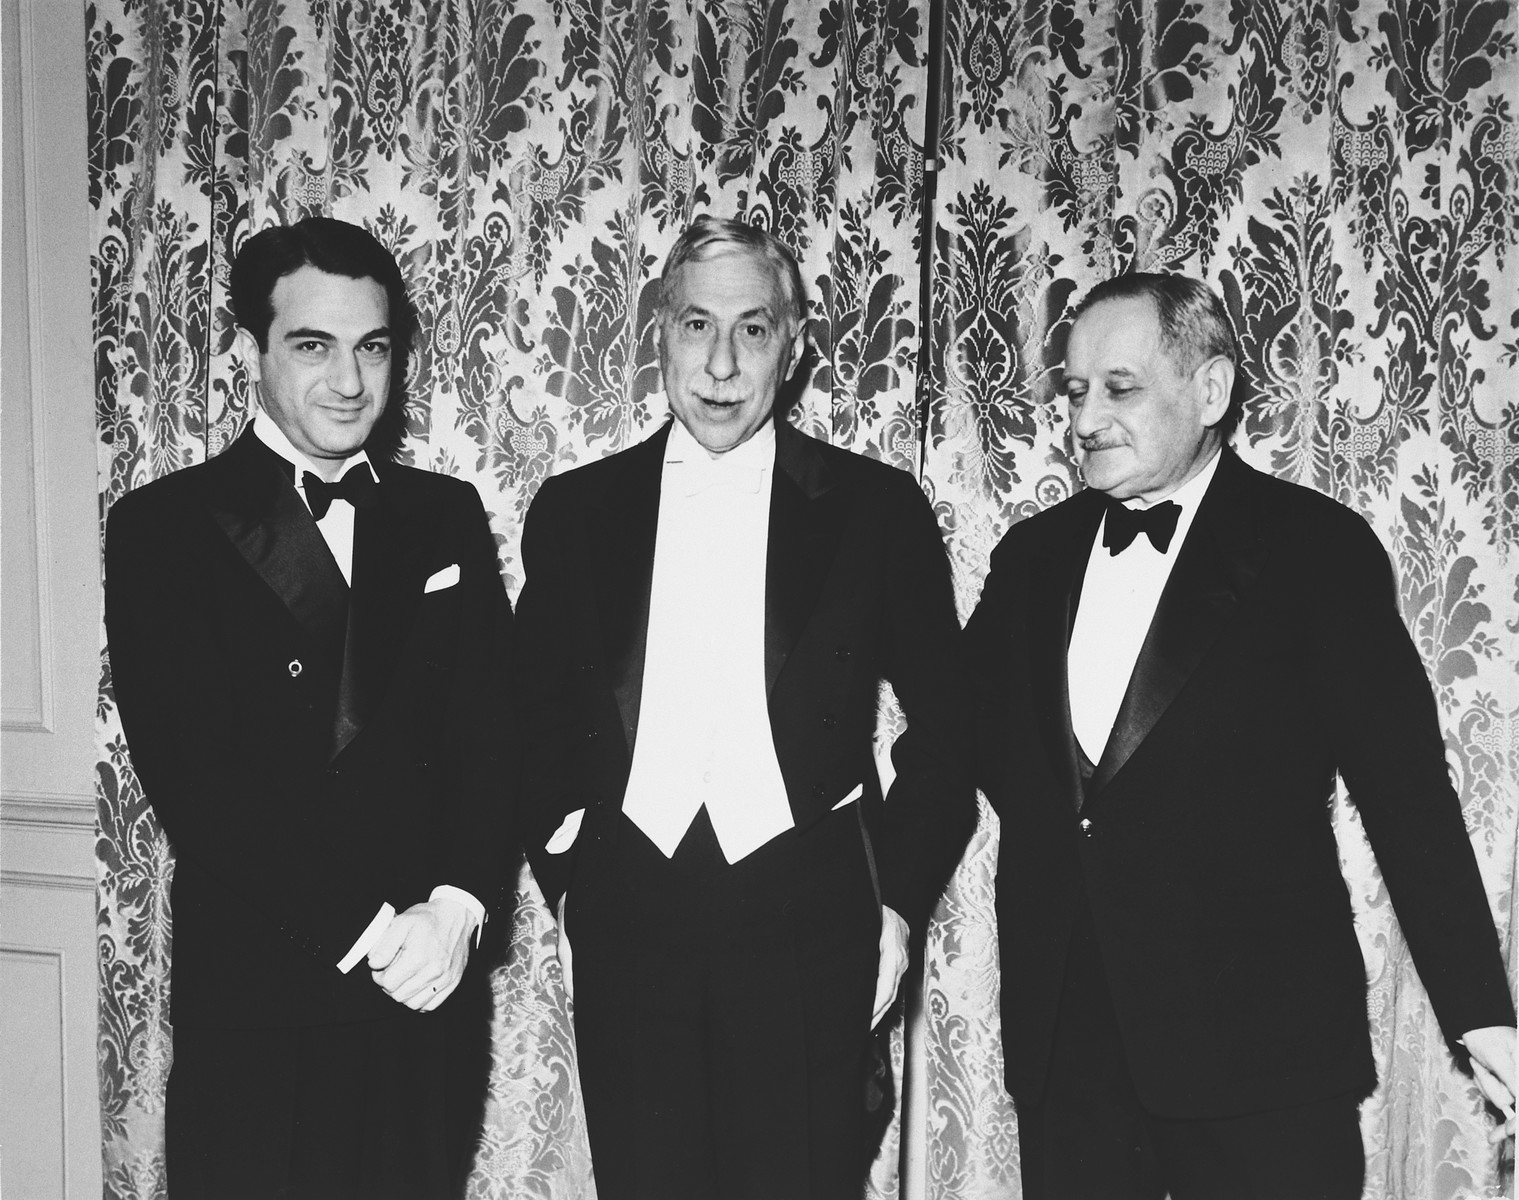 Group portrait of American Zionist leaders and philanthropists.

From left to right are George Blacker, Joseph M. Poskauer, and Paul Baerwald of the JDC.